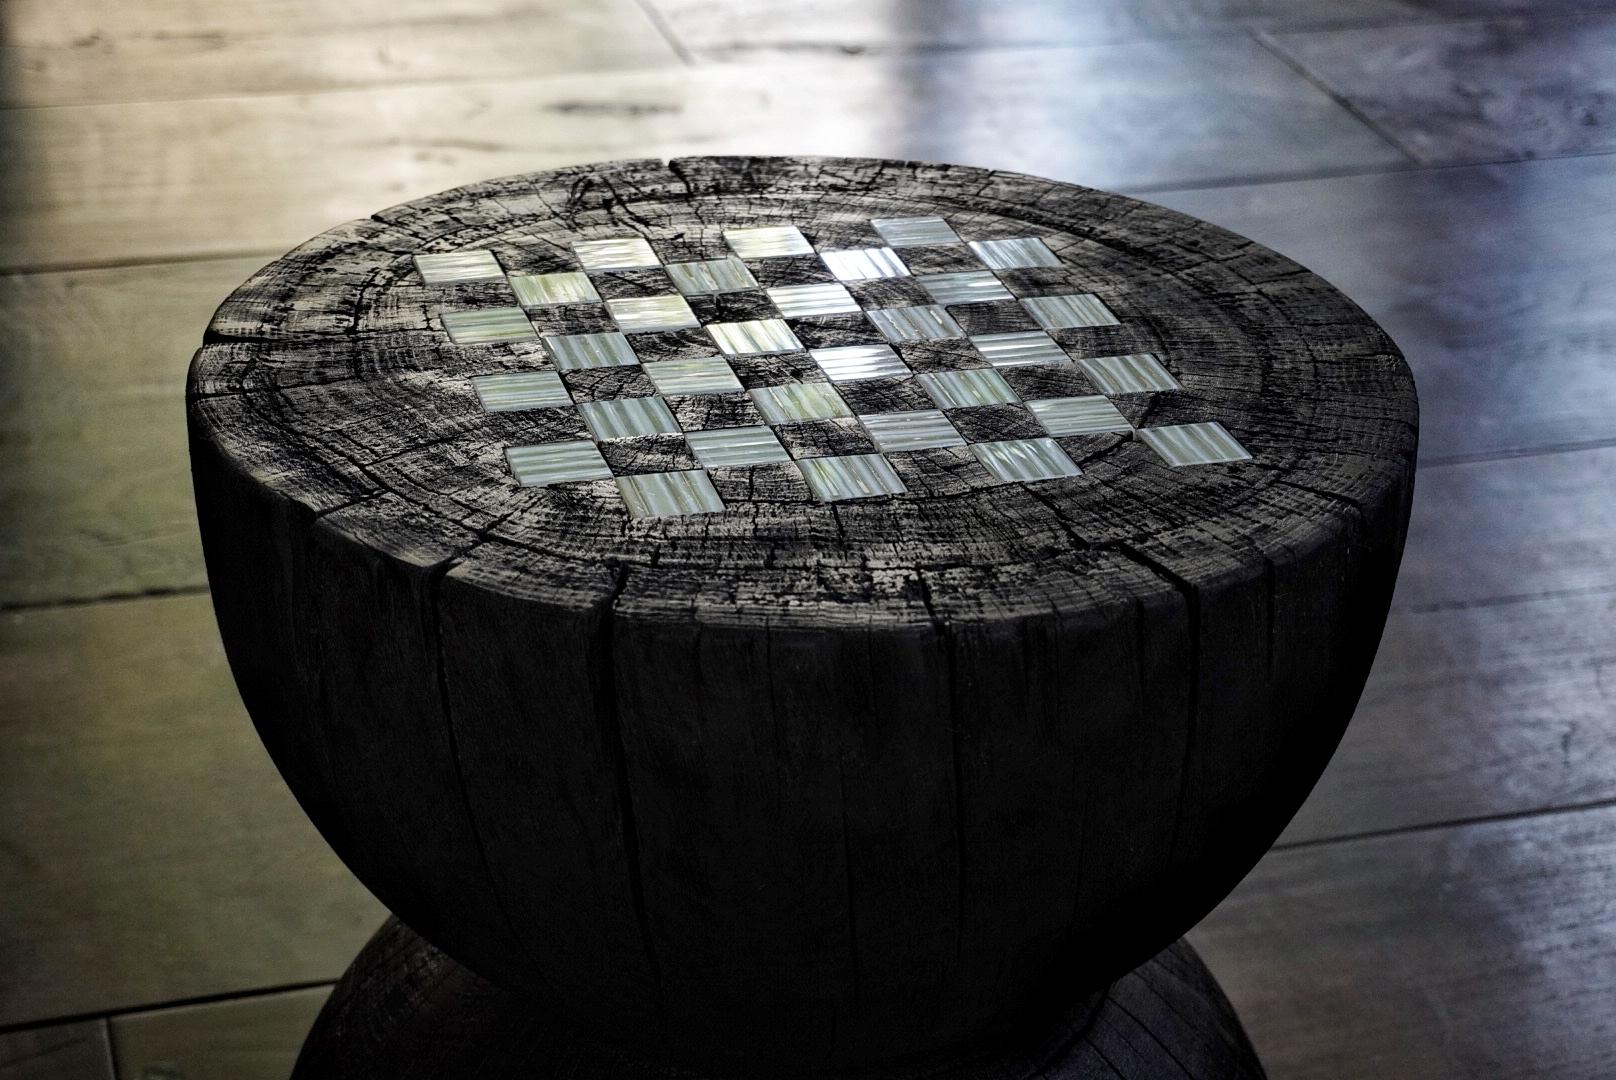 Chess table
This Board Games edition presents Classic games and decorative pieces like Backgammon, Chess and Tic Tac Toe, made out of wood and glass.

Since 2000, Orfeo Quagliata offers a remarkable consistency based in design and a Fine technical